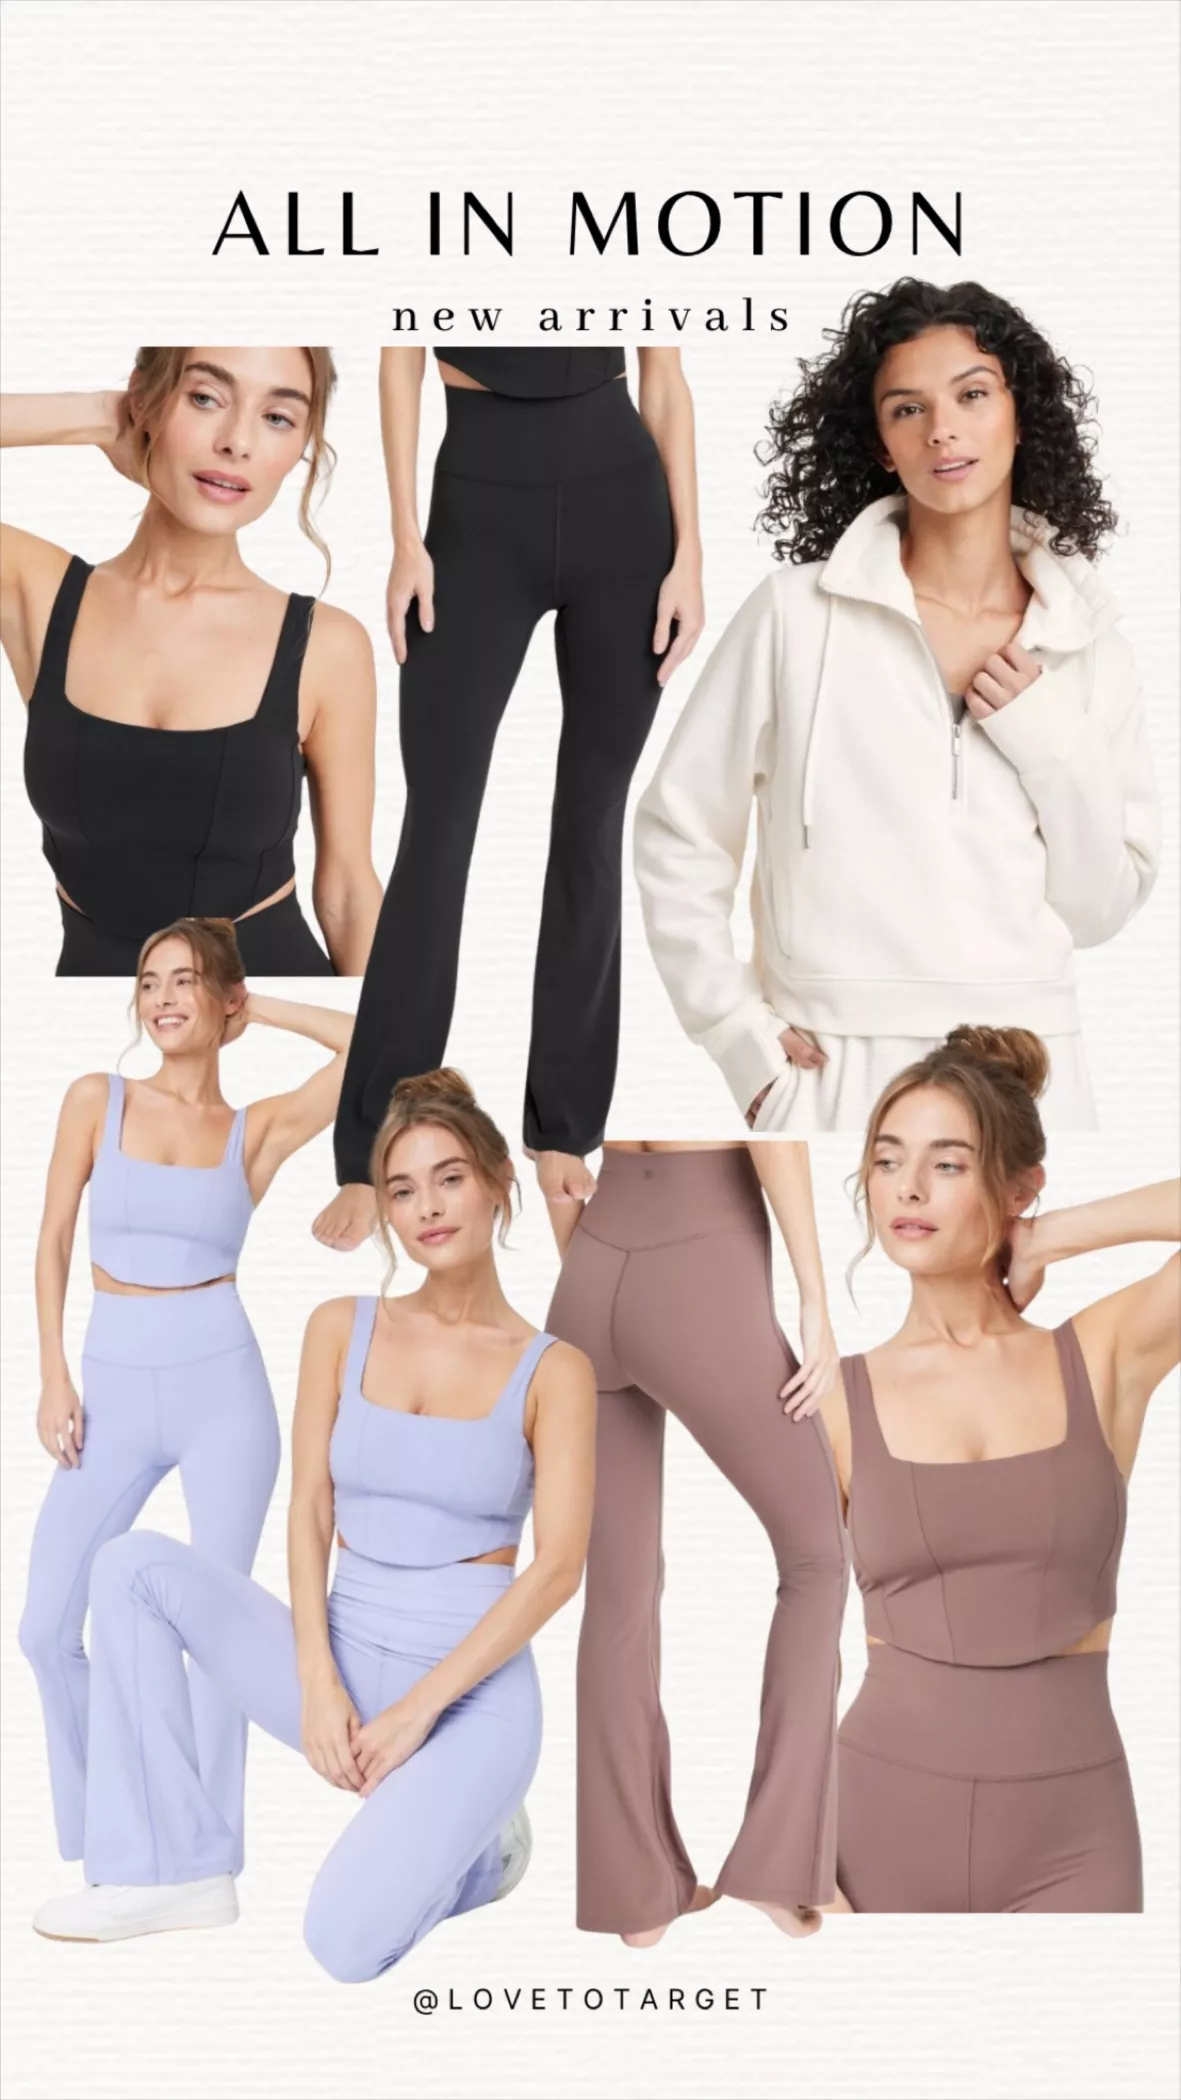 🎯 30% Off Activewear at Target! Available both online and in